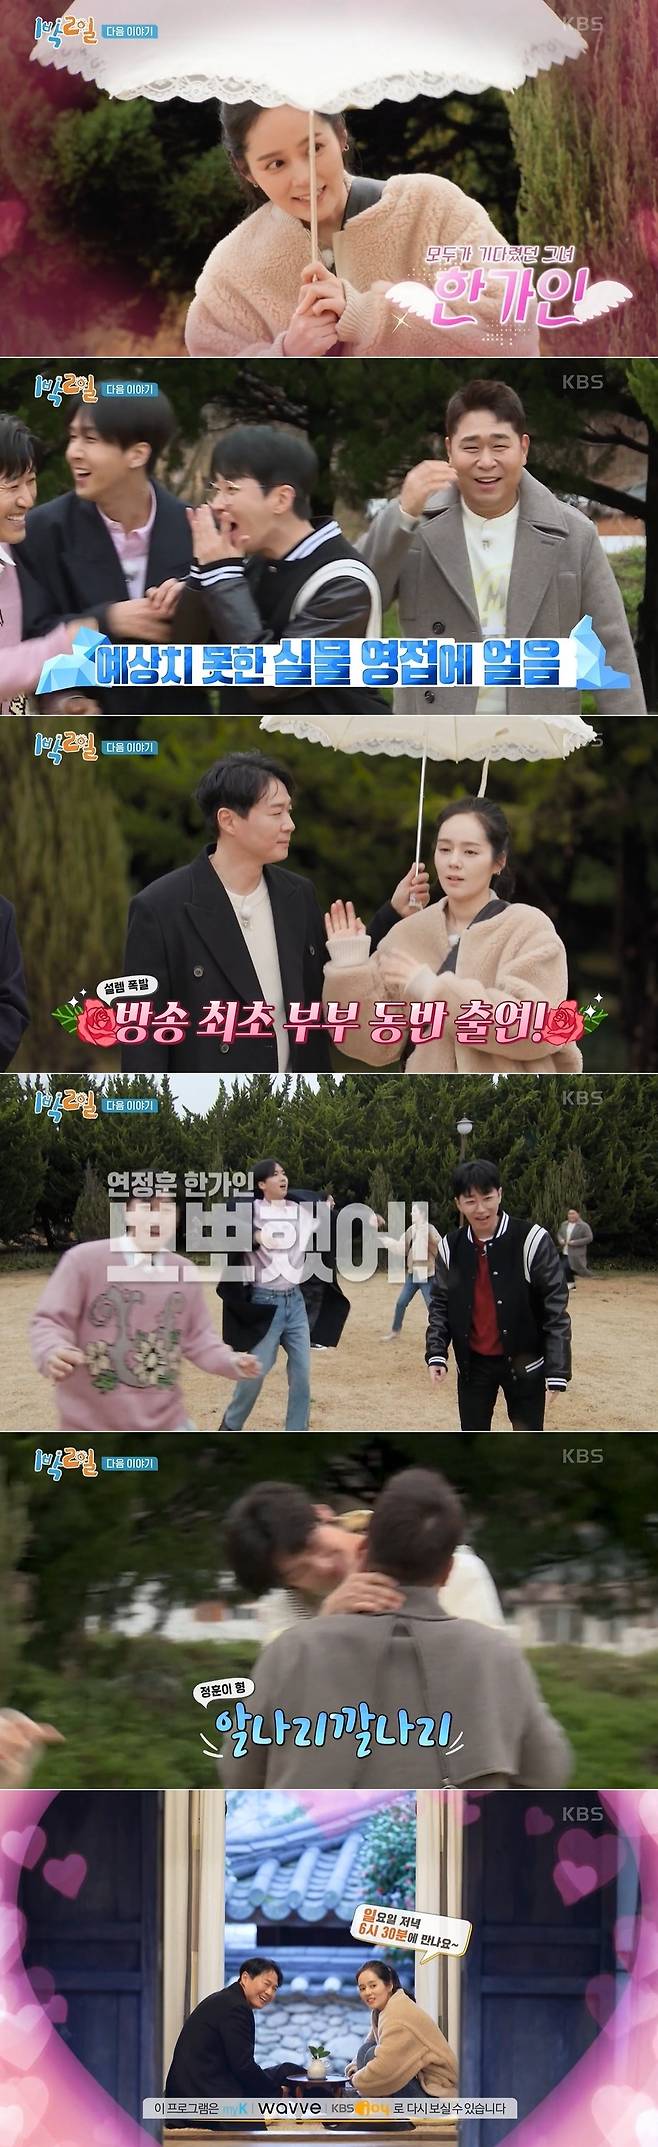 The Yeon Jung-hoonHan Ga-in couple will appear in 2 Days & 1 Night together.KBS 2TV 2 Days & 1 Night Season 4 broadcast on March 27 The next weeks trailer shows Han Ga-in, who is the wife and actor of Yeon Jung-hoon, finally appearing, bringing out the expectation of viewers.In the public trailer, Han Ga-in appeared with the caption Surrence Spring came, and the members of 2 Days & 1 Night who saw Han Ga-in were delighted with the appearance of the guest who was looking forward to.This is the first time these couples have ever appeared in an entertainment show. When they kissed under mass production, the members said, Yeon Jung-hoon Han Ga-in kissed!, which has been excited, so it has skyrocketed expectations for next weeks broadcast.